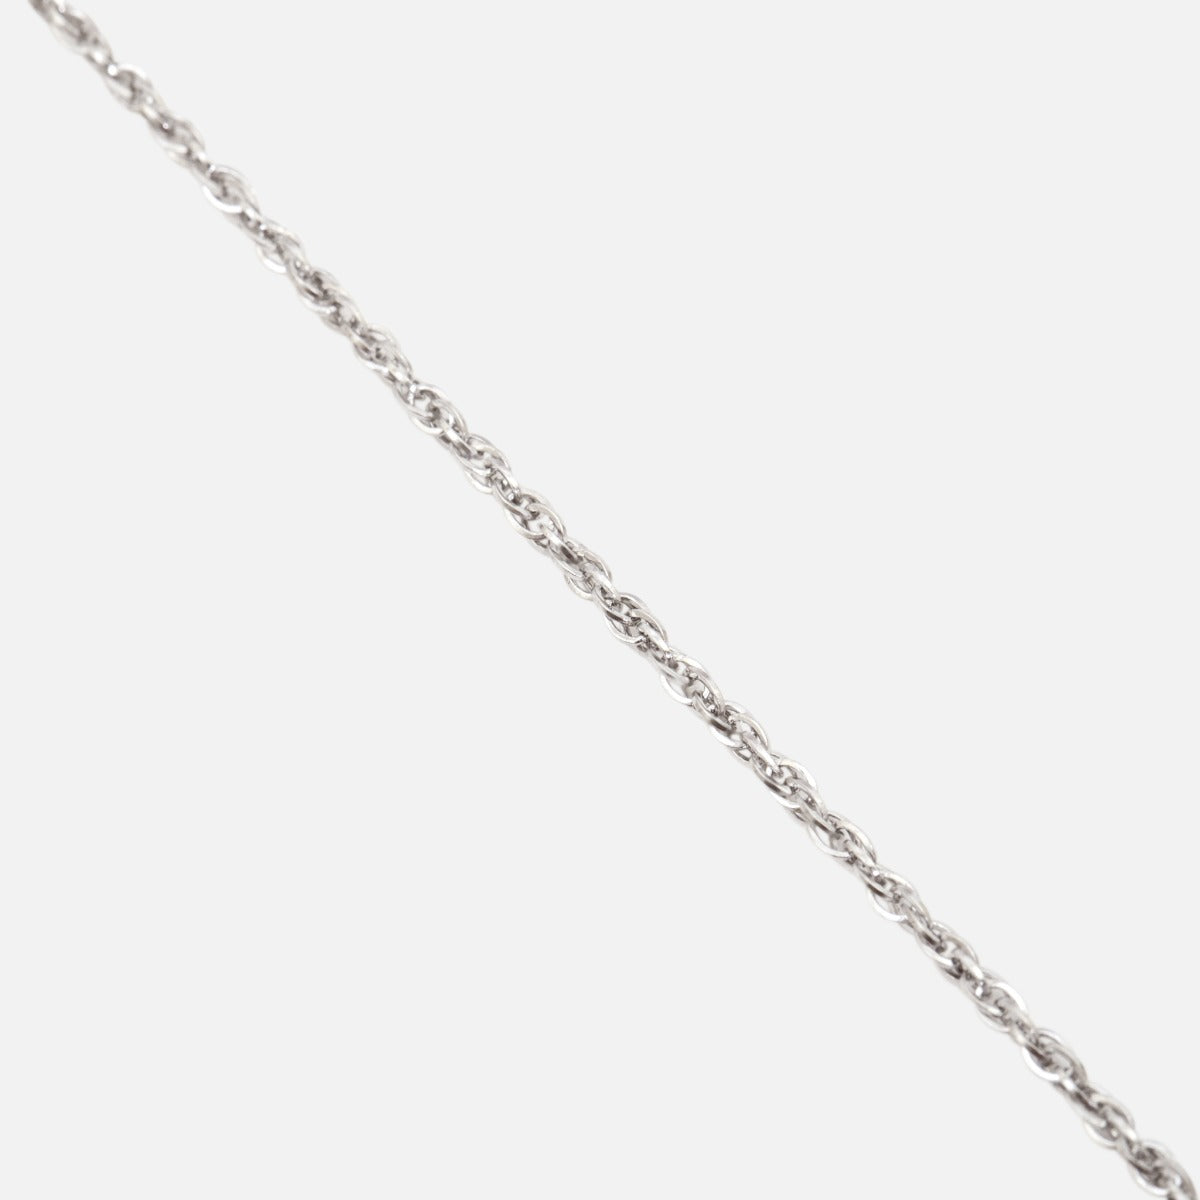 Thin stainless steel ankle chain